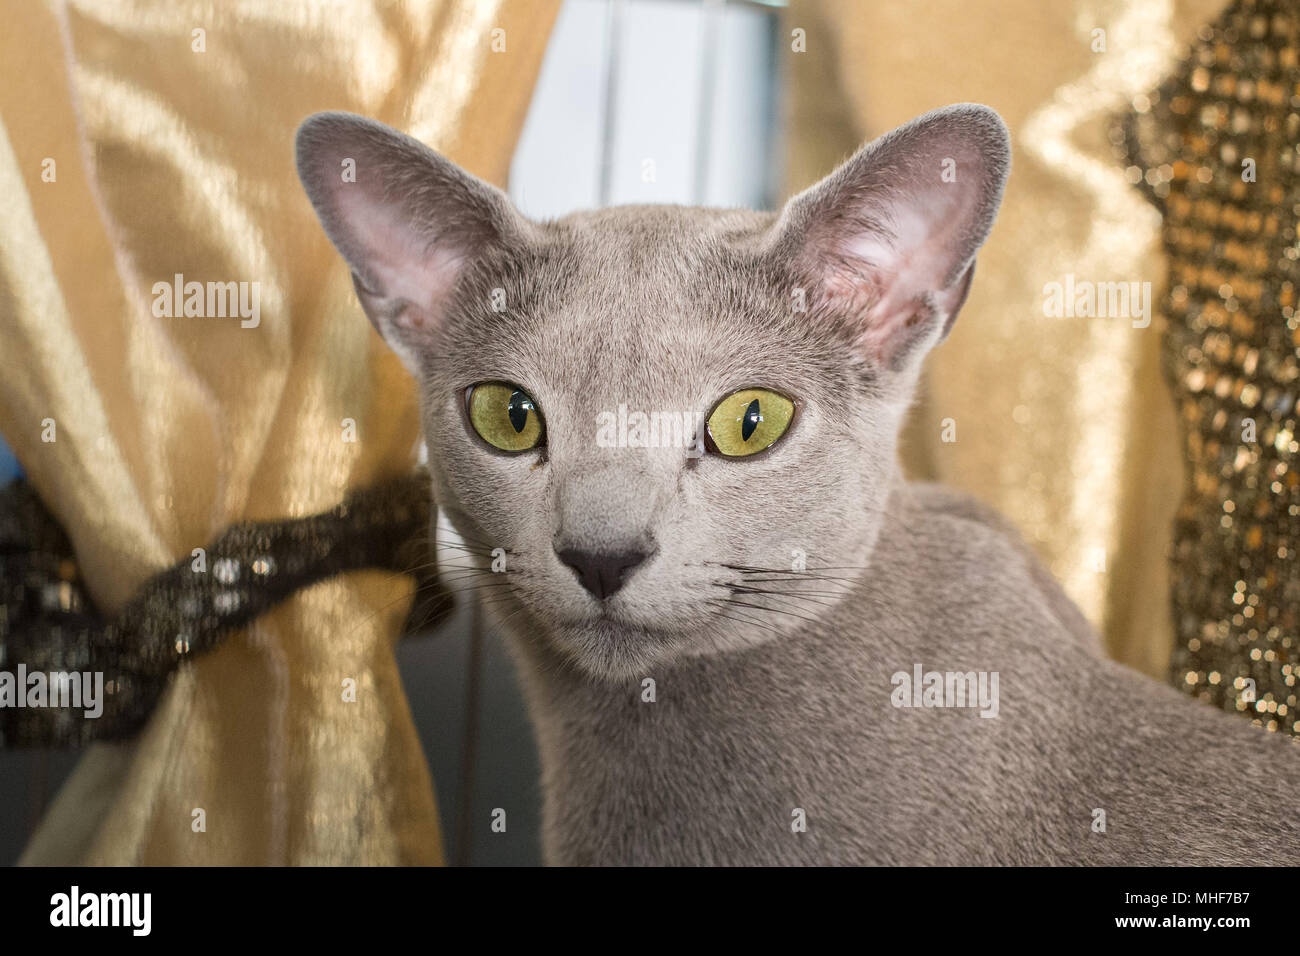 russian blue cat close up looking at you Stock Photo